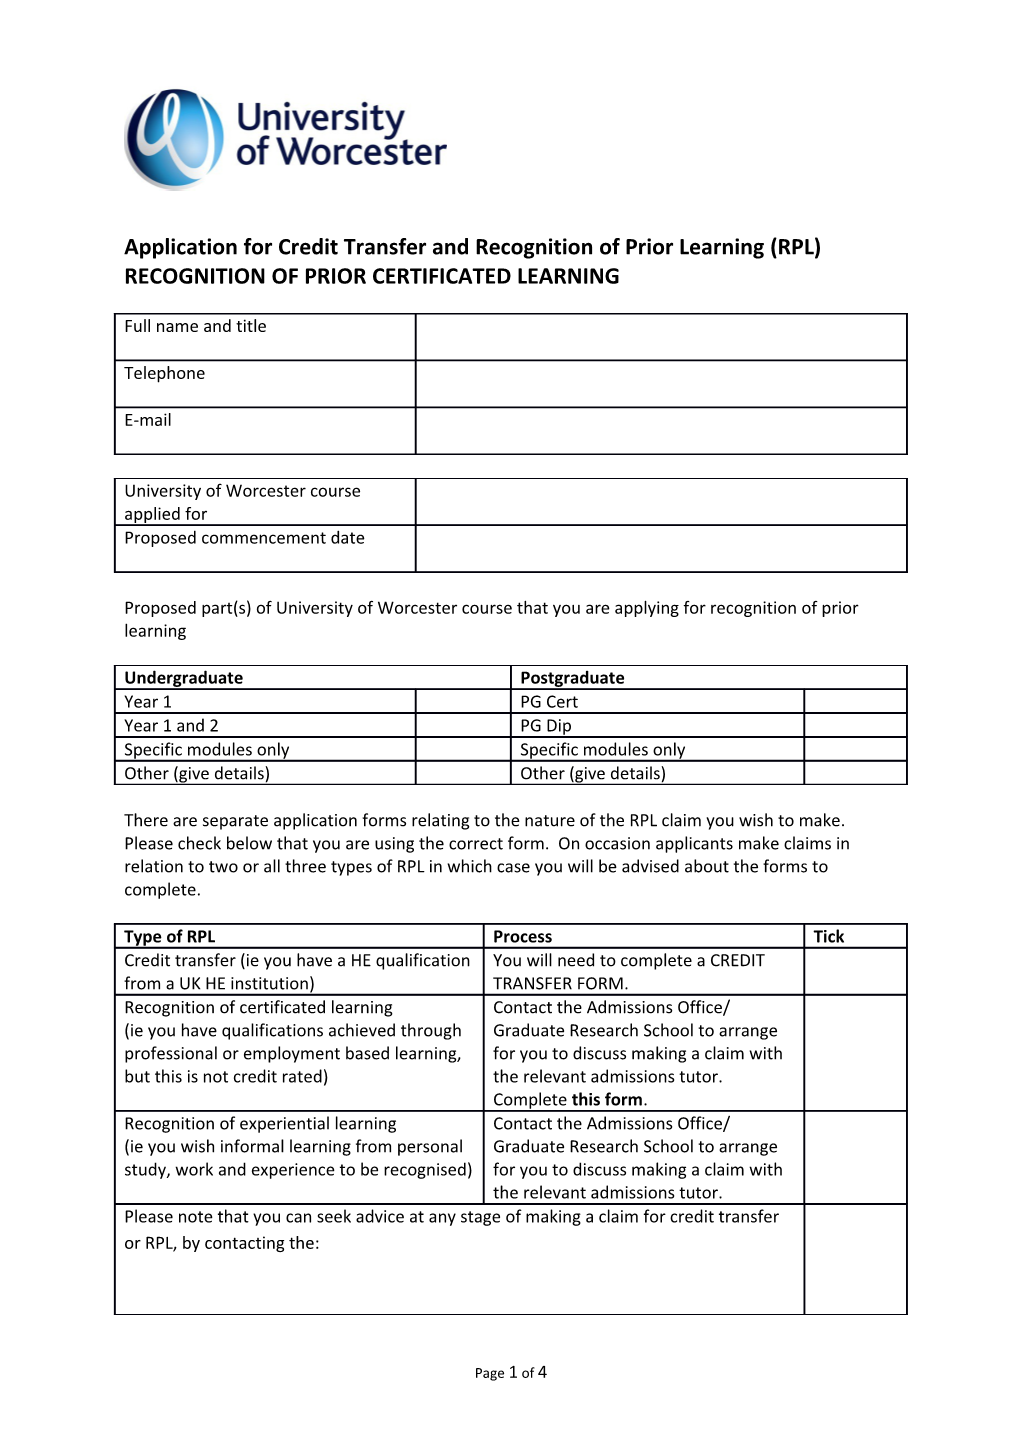 Application for Credit Transfer and Recognition of Prior Learning (RPL)